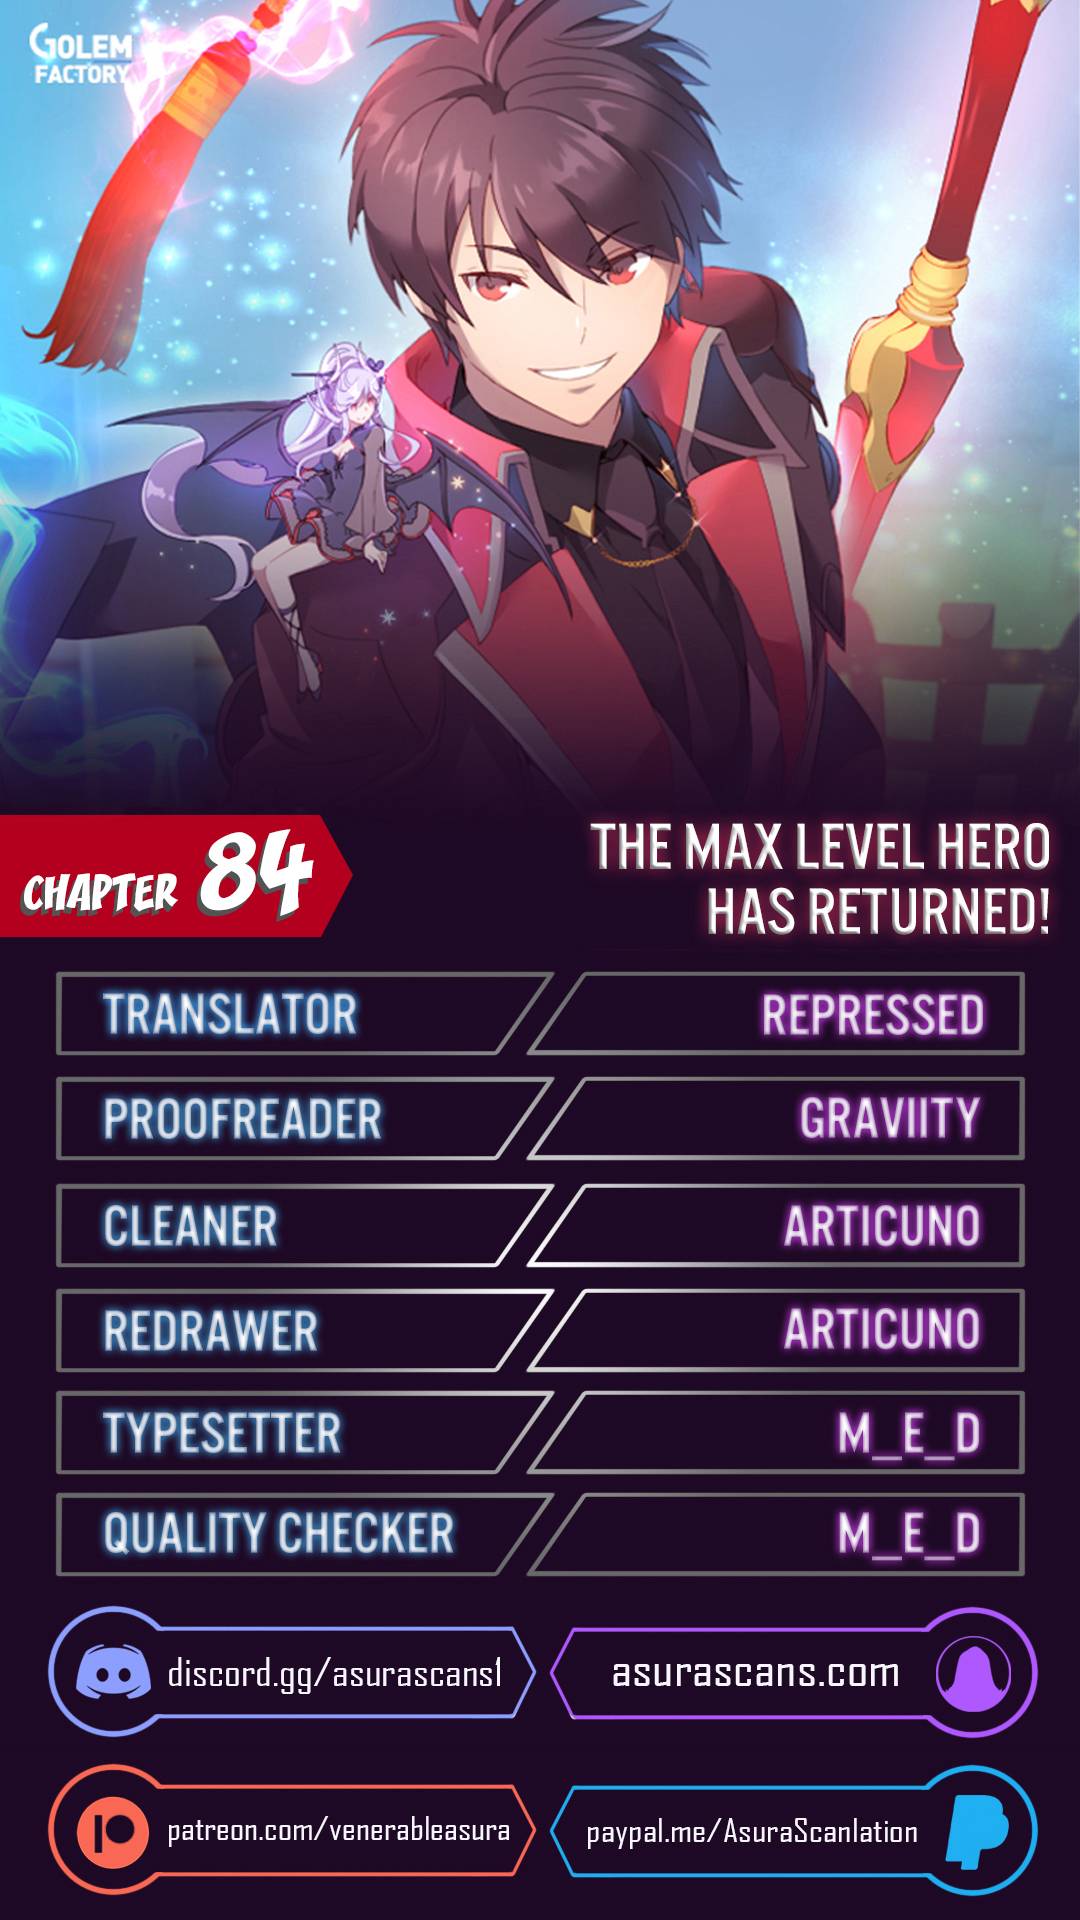 The MAX leveled hero will return! Chapter 84